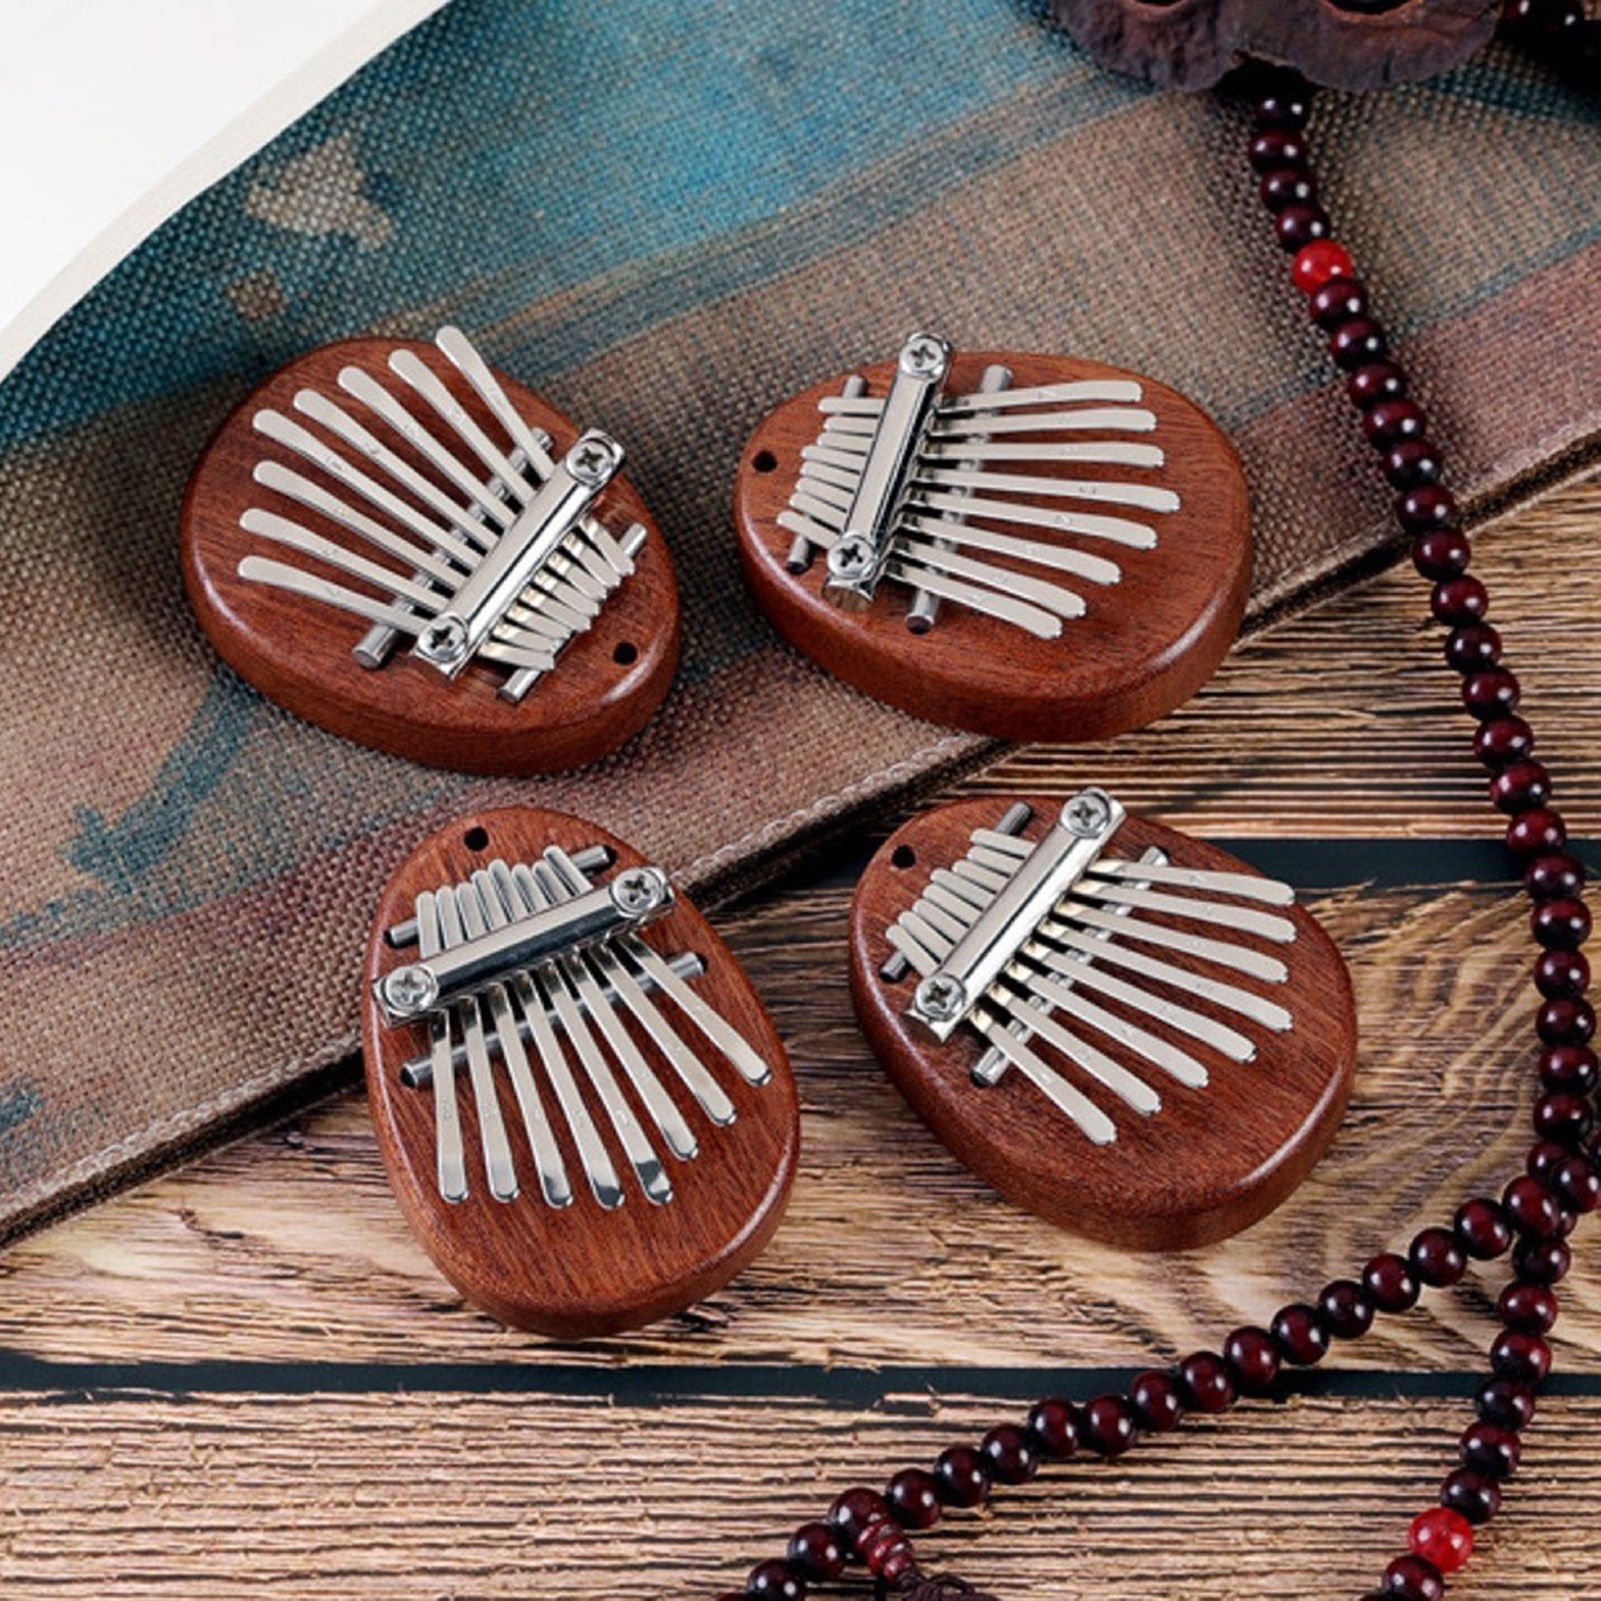 SANWOOD Thumb Piano Exquisite Fine Workmanship Musical Instrument Kalimba Finger Thumb Piano for Kids Adults Beginners - image 3 of 6